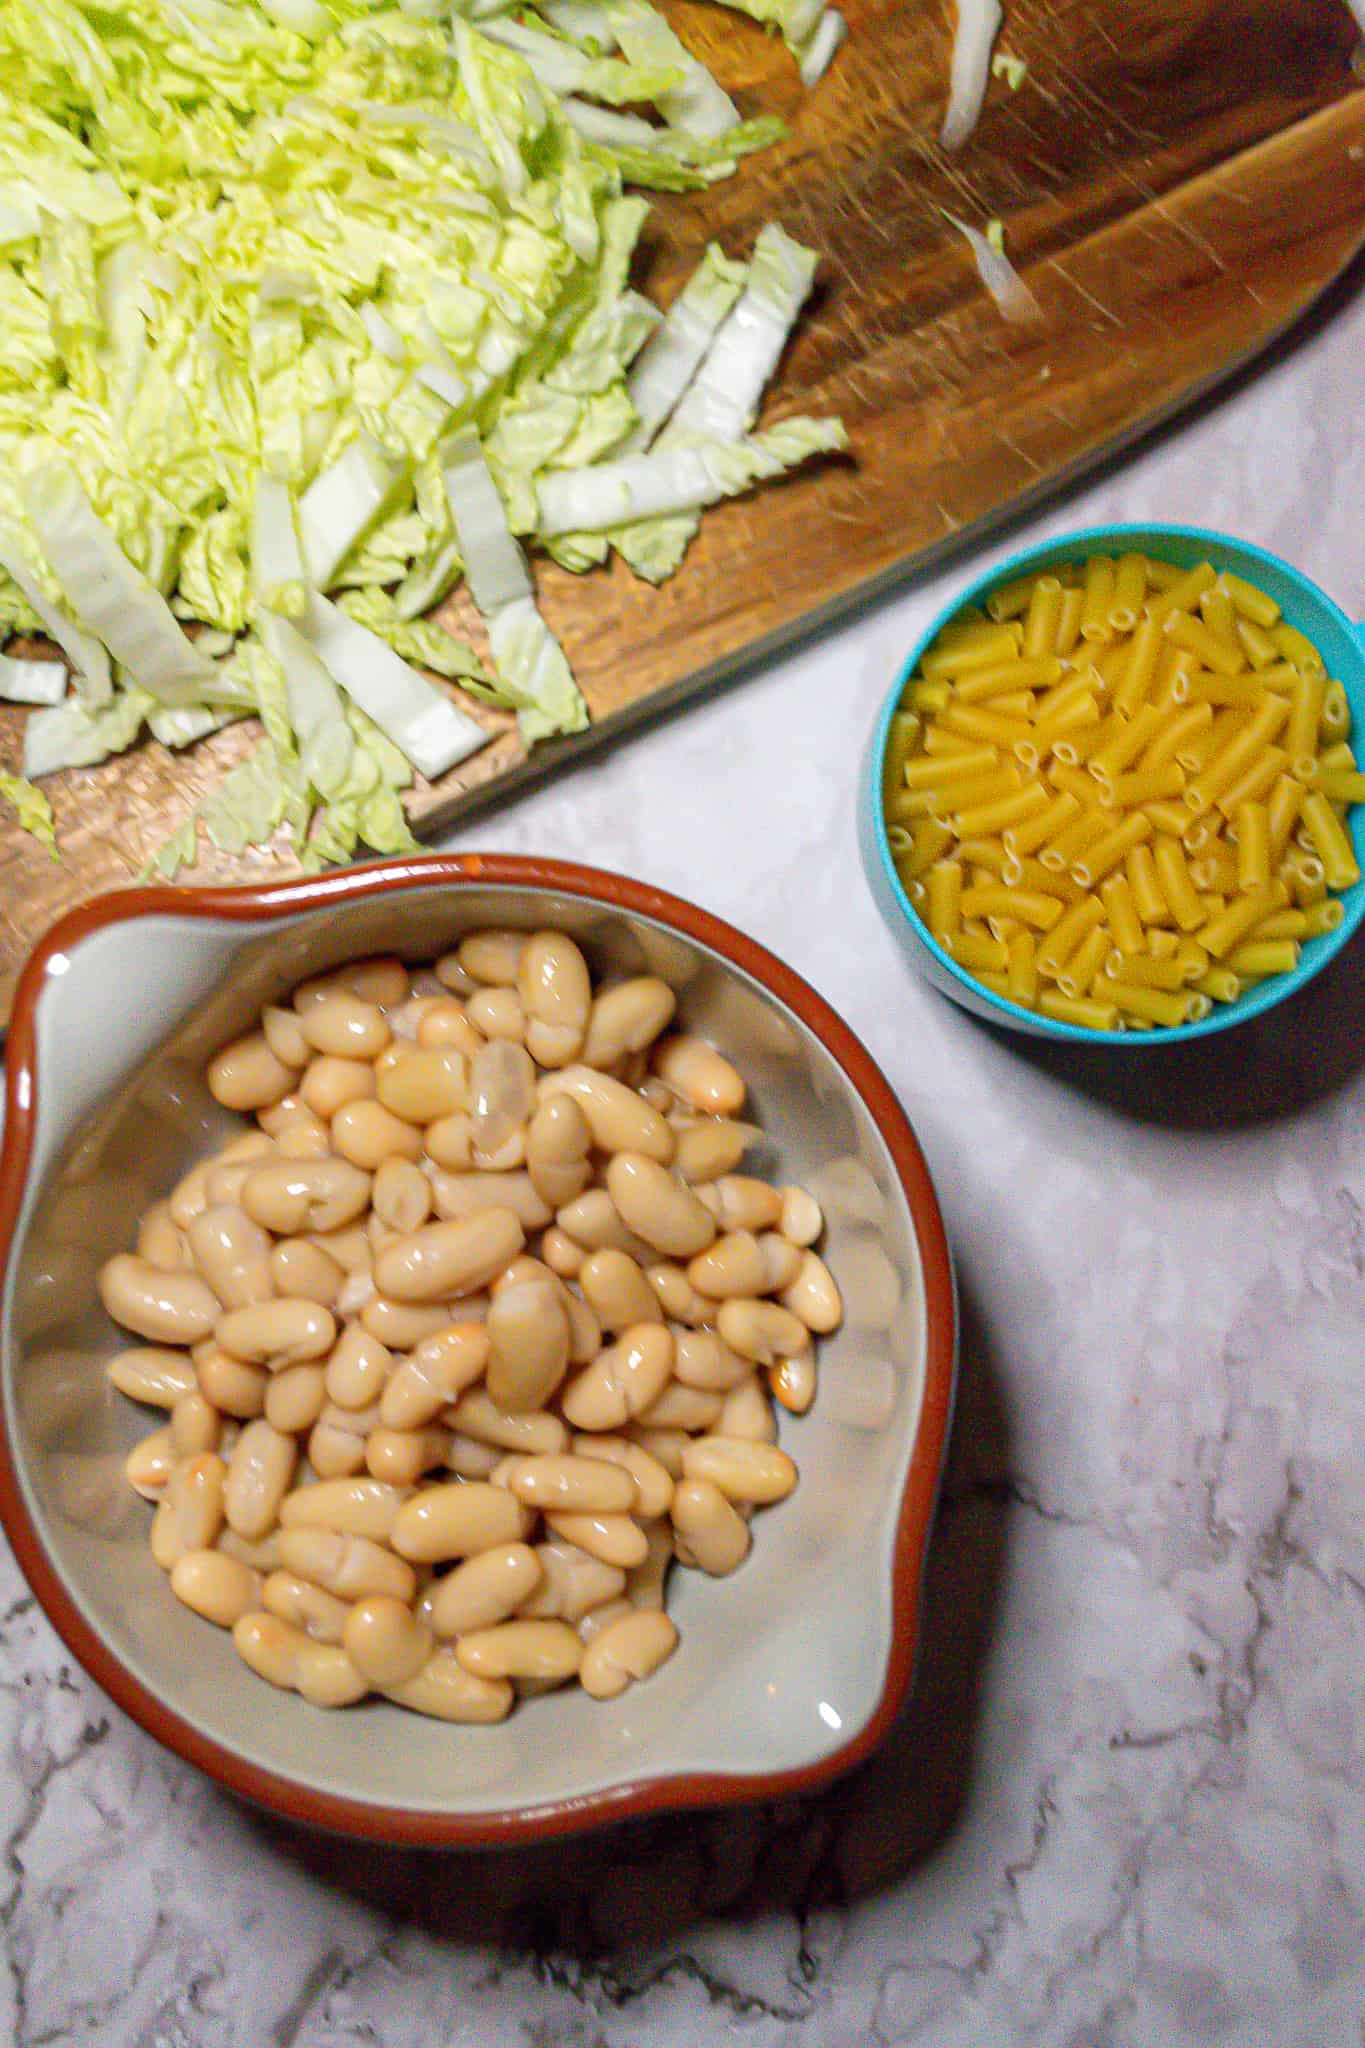 Top view of a bowl of cannellini beans, napa cabbage on a cutting board, and a measuring cup of macaroni.